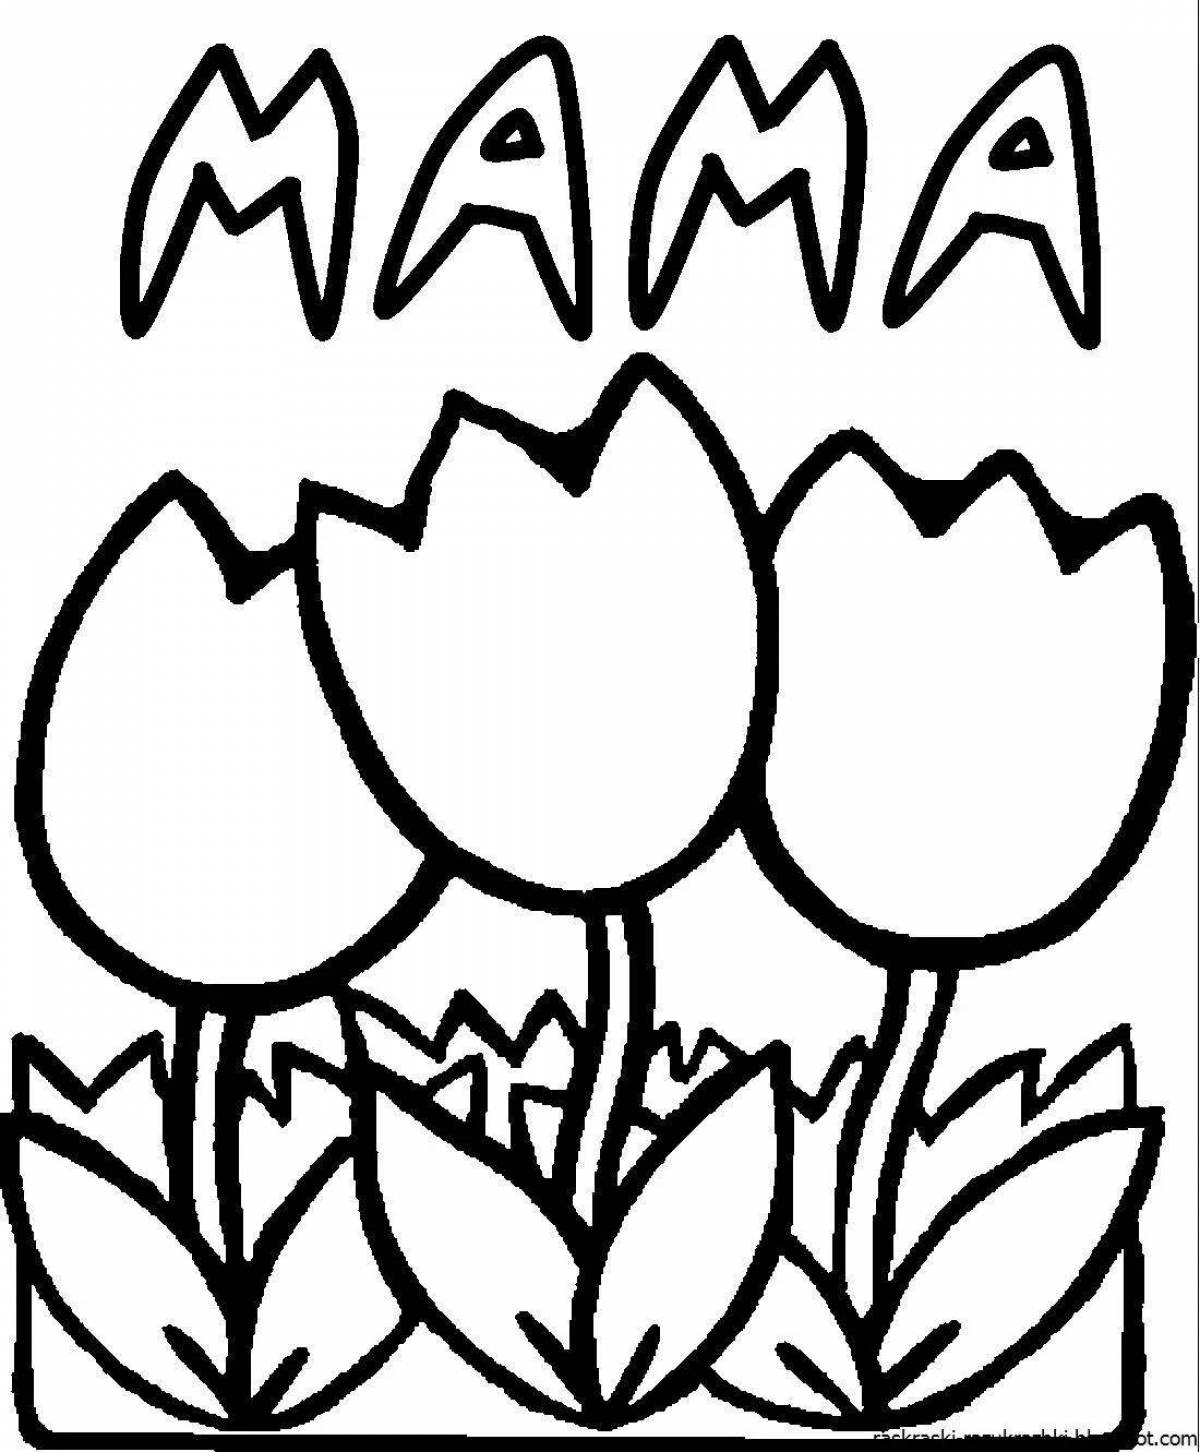 Funny March 8 coloring book for kids